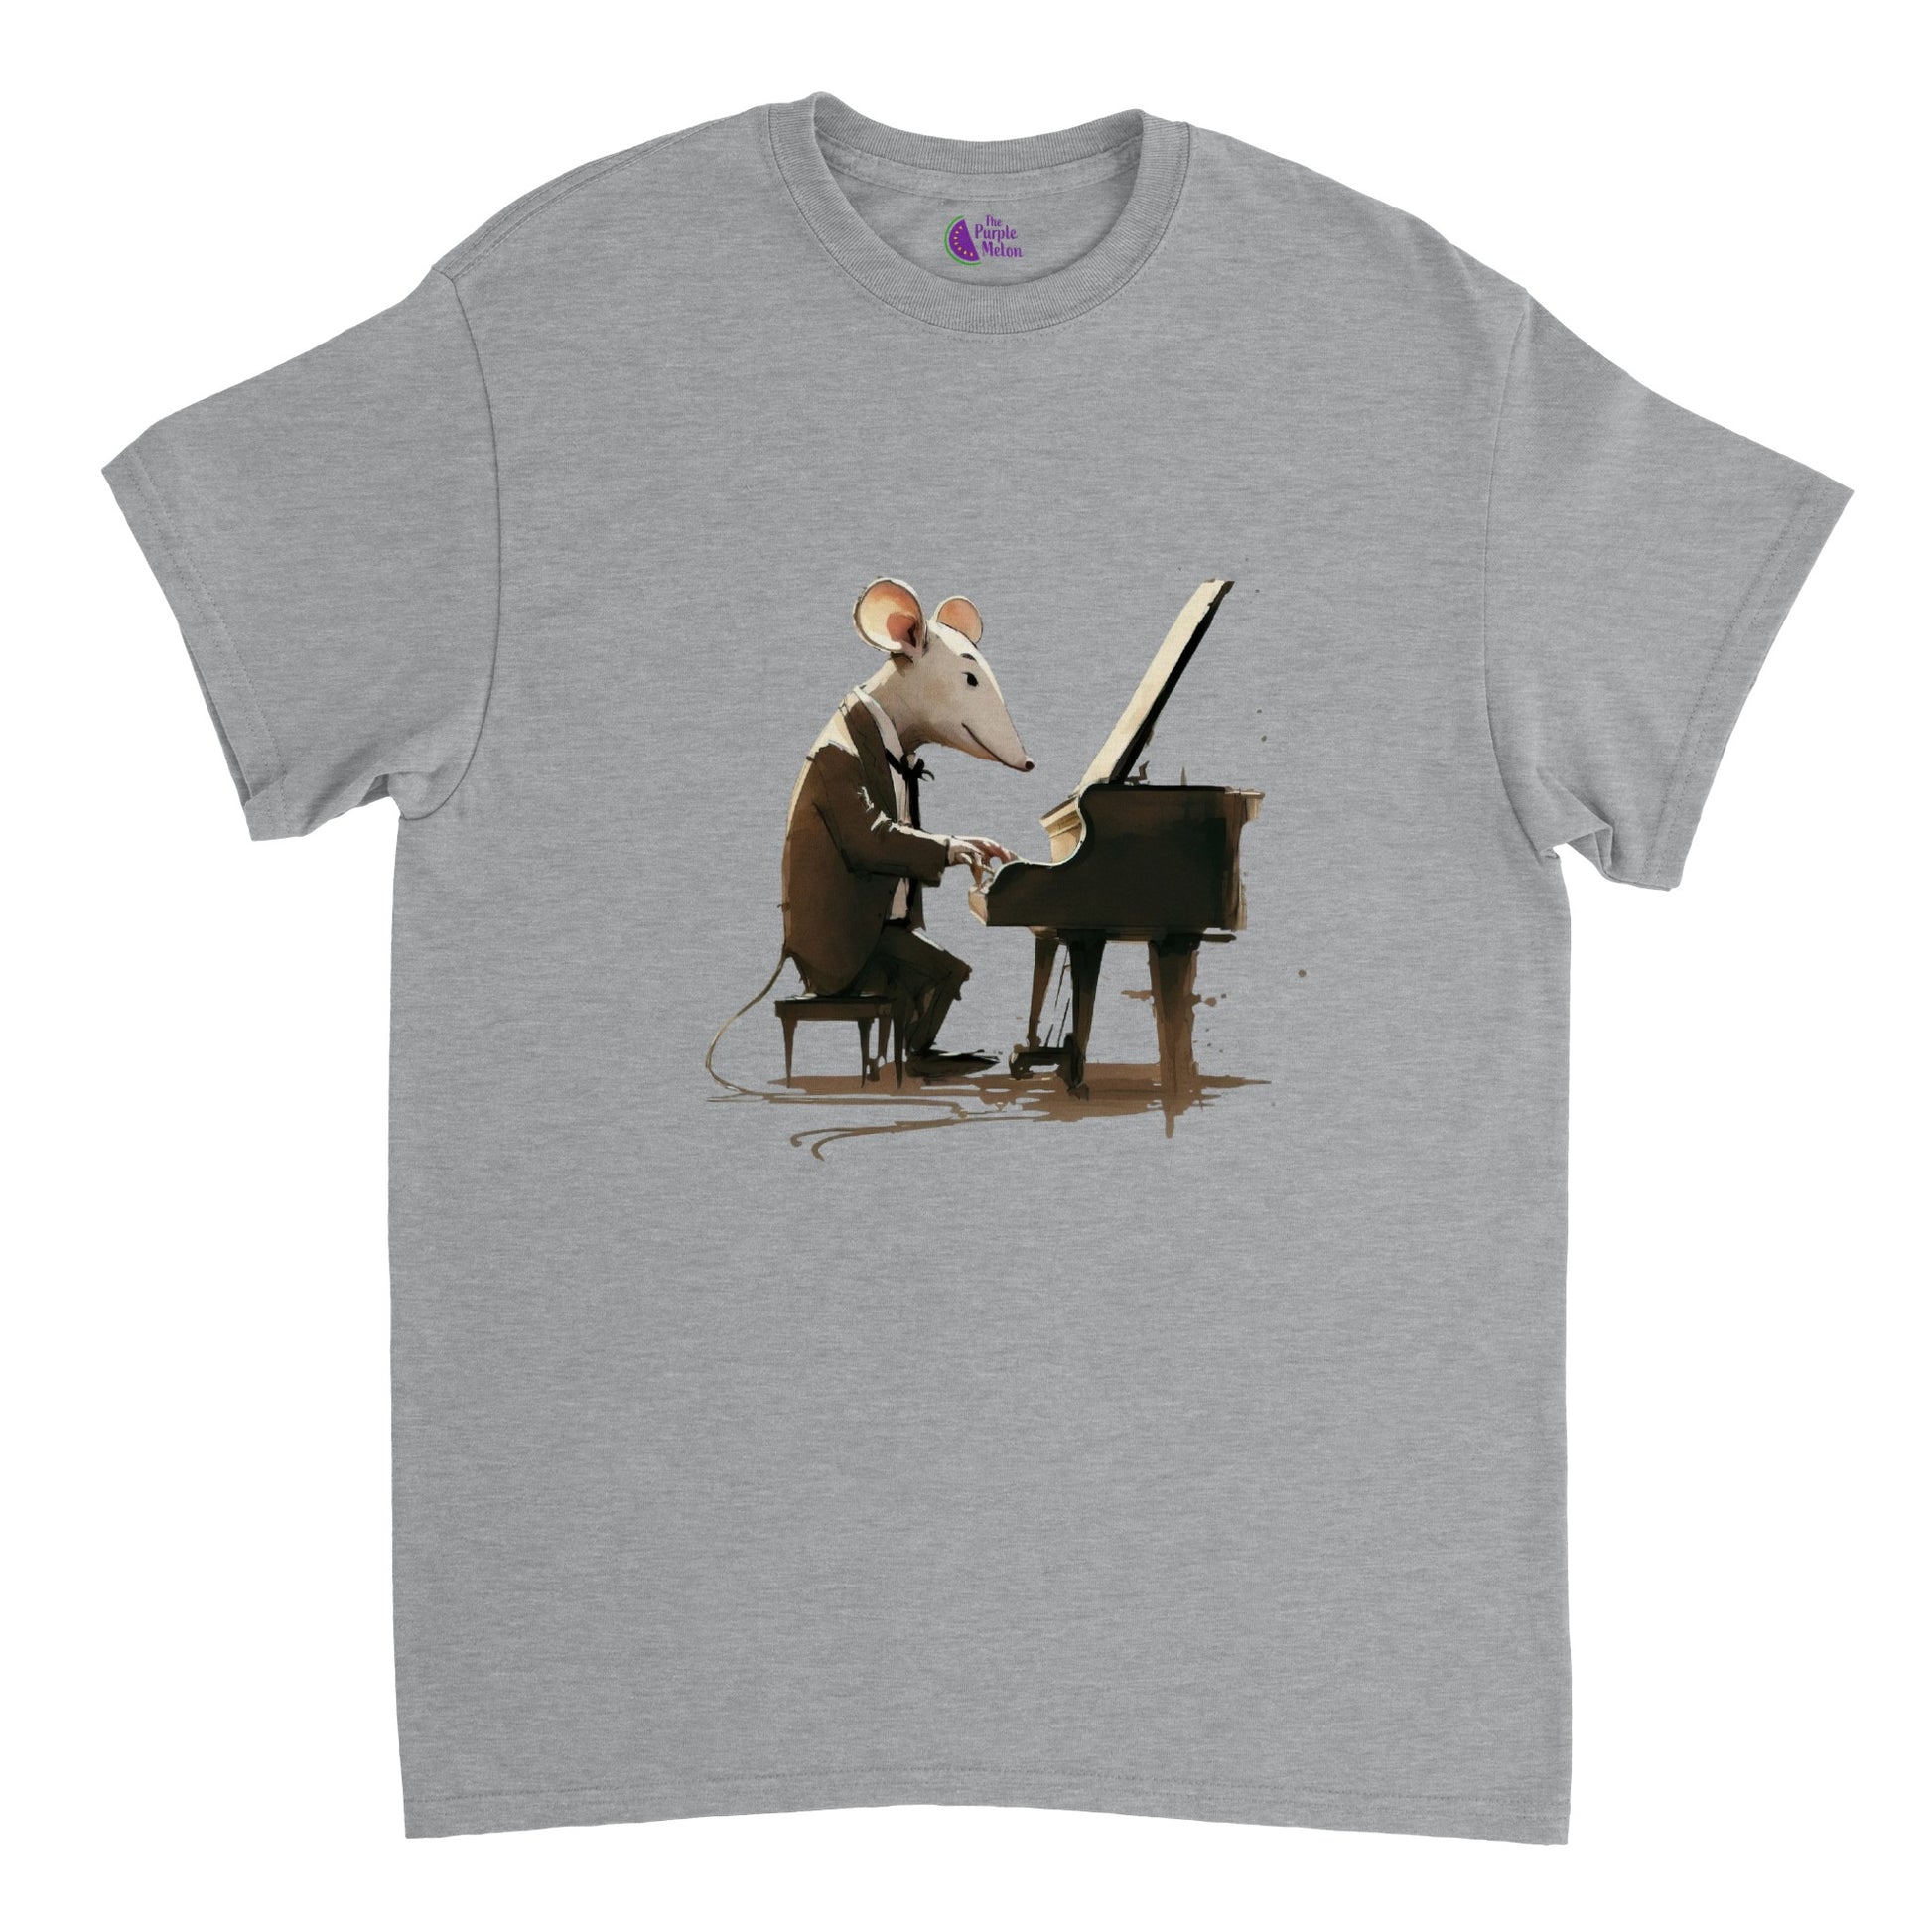 Grey t-shirt with a mouse playing a piano print